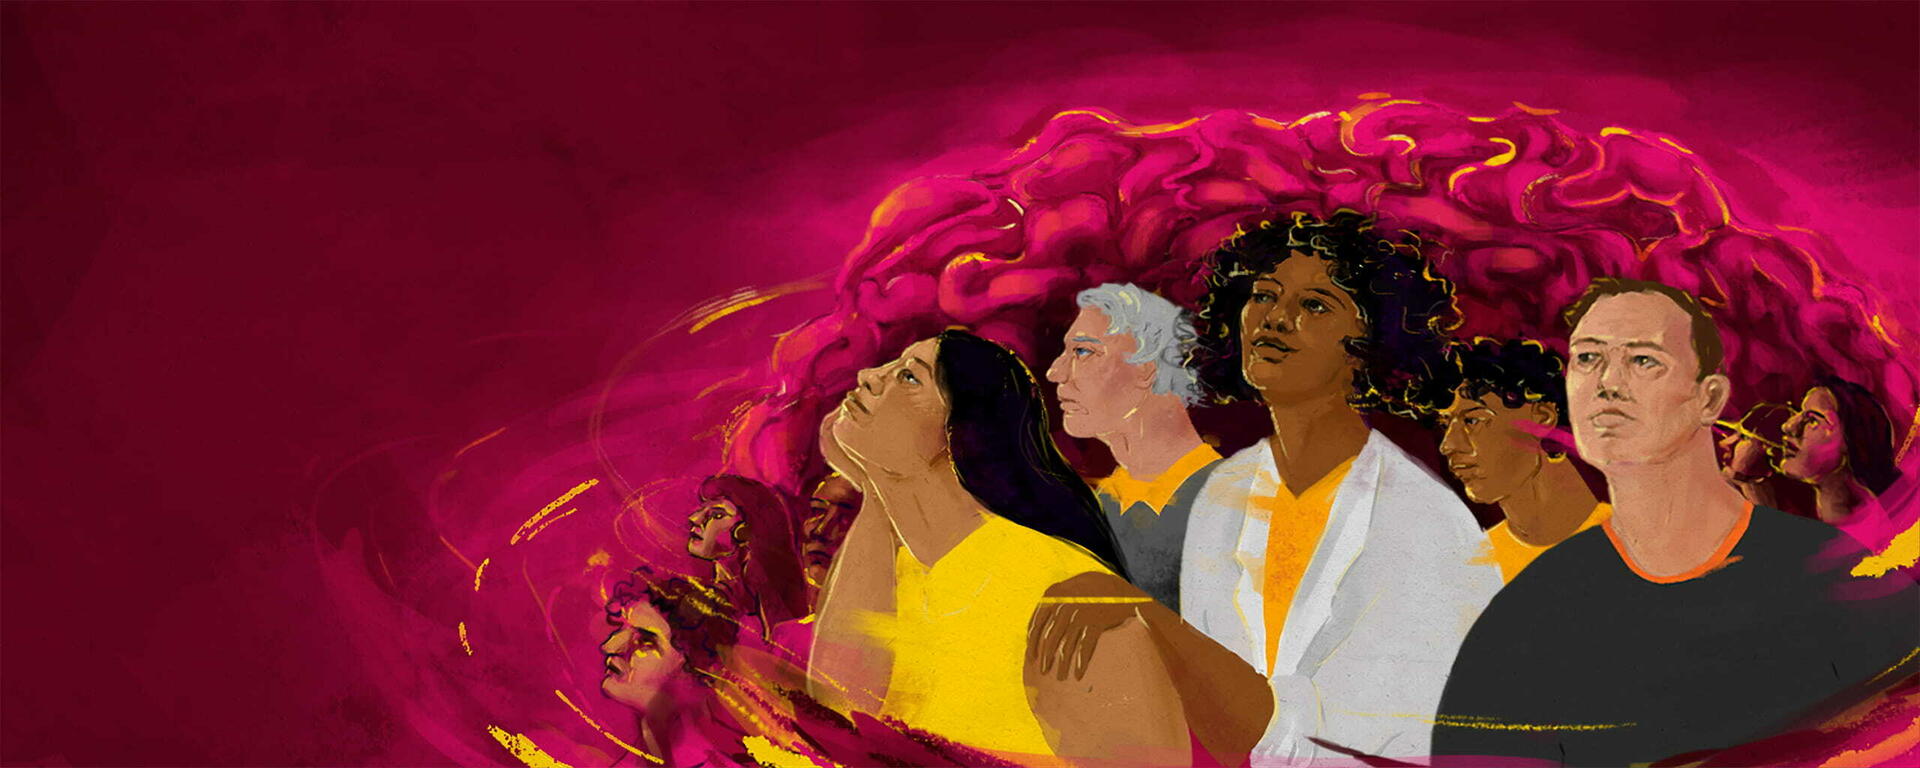 A painted illustration shows five diverse people in the foreground, representing mental health conditions across communities, with a central person representing hope. A large, bright pink brain with yellow and pink swirls is in the background.